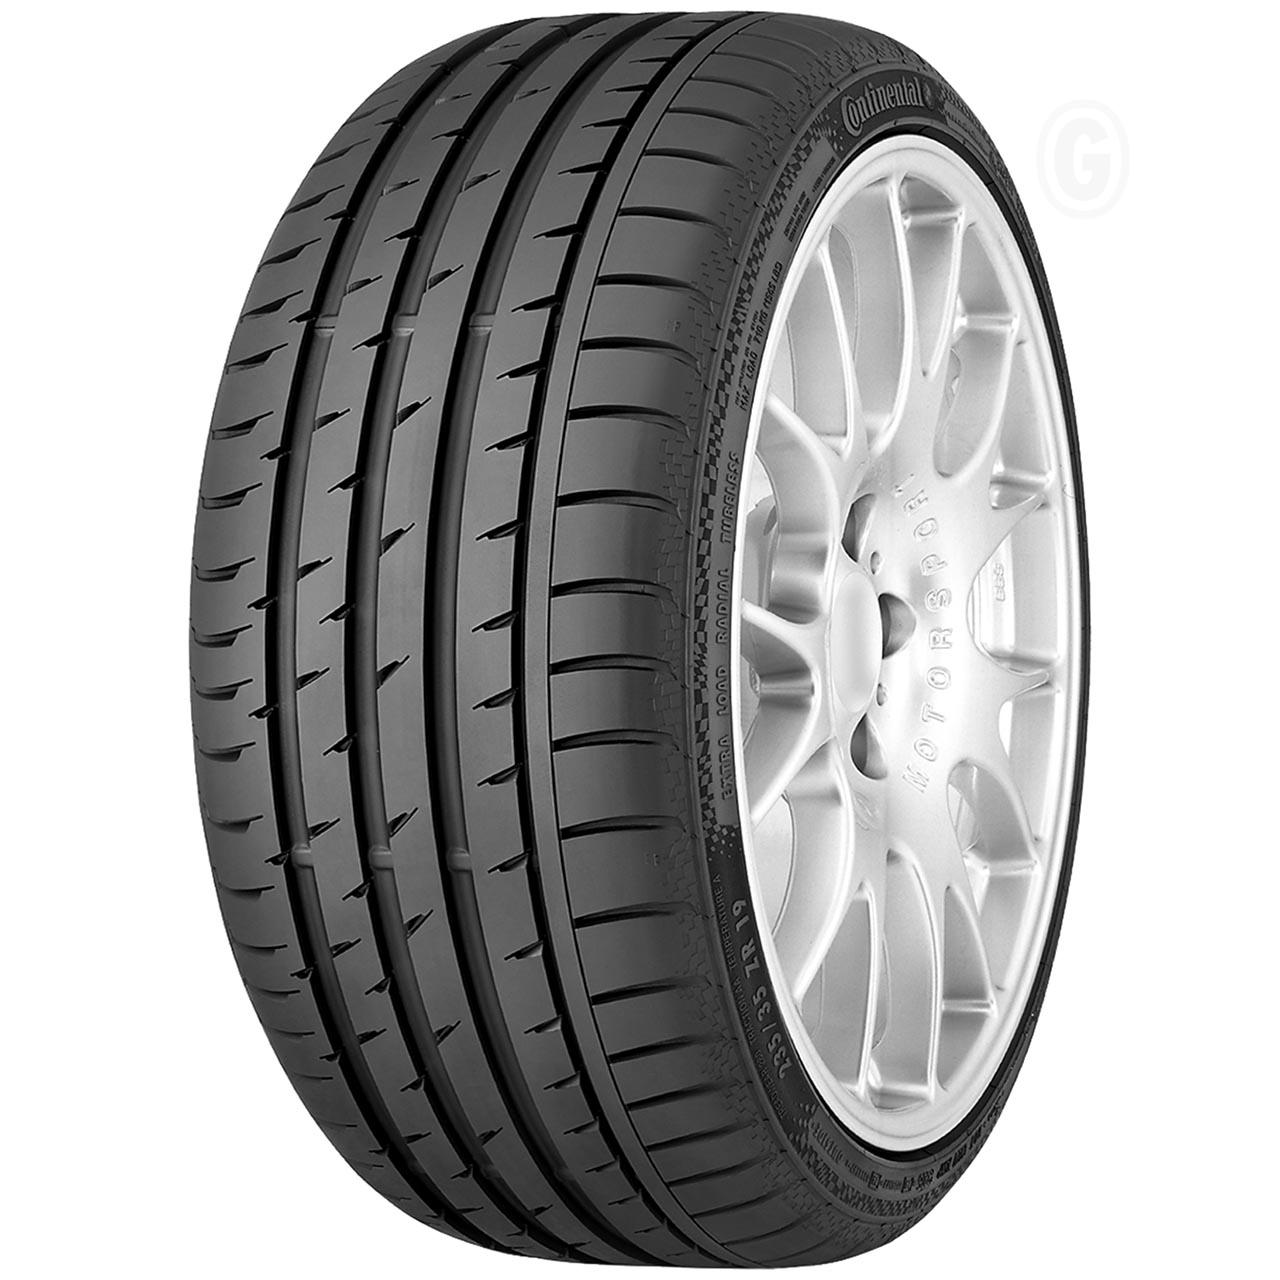 Continental CONTISPORTCONTACT 3 235/45R17 97W XL SSR FR FOR